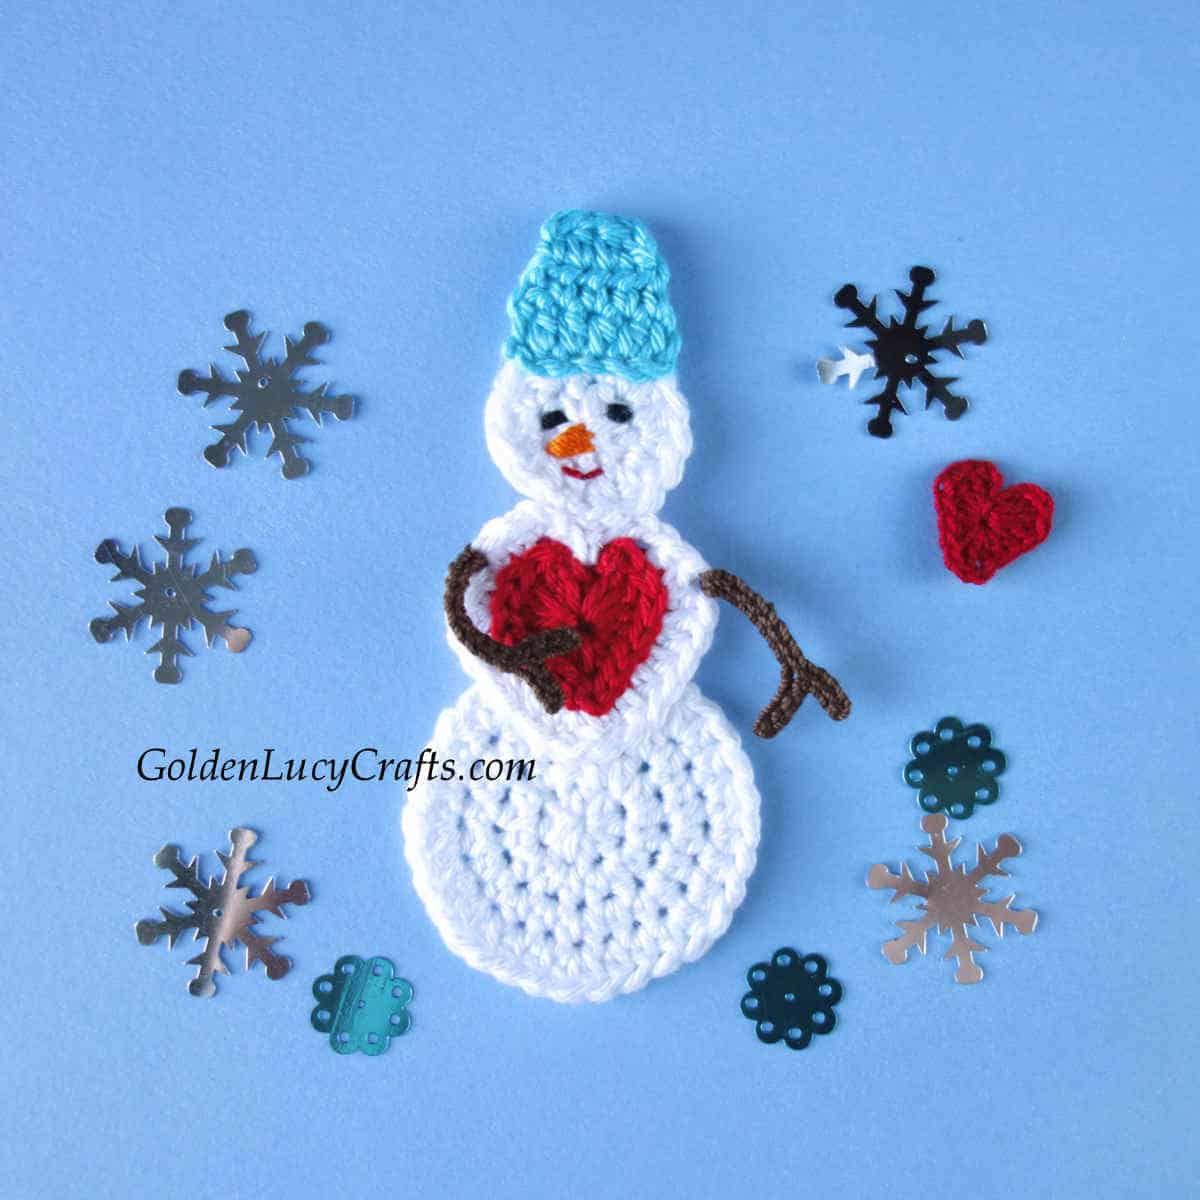 Snowman with red heart on his chest crocheted applique.